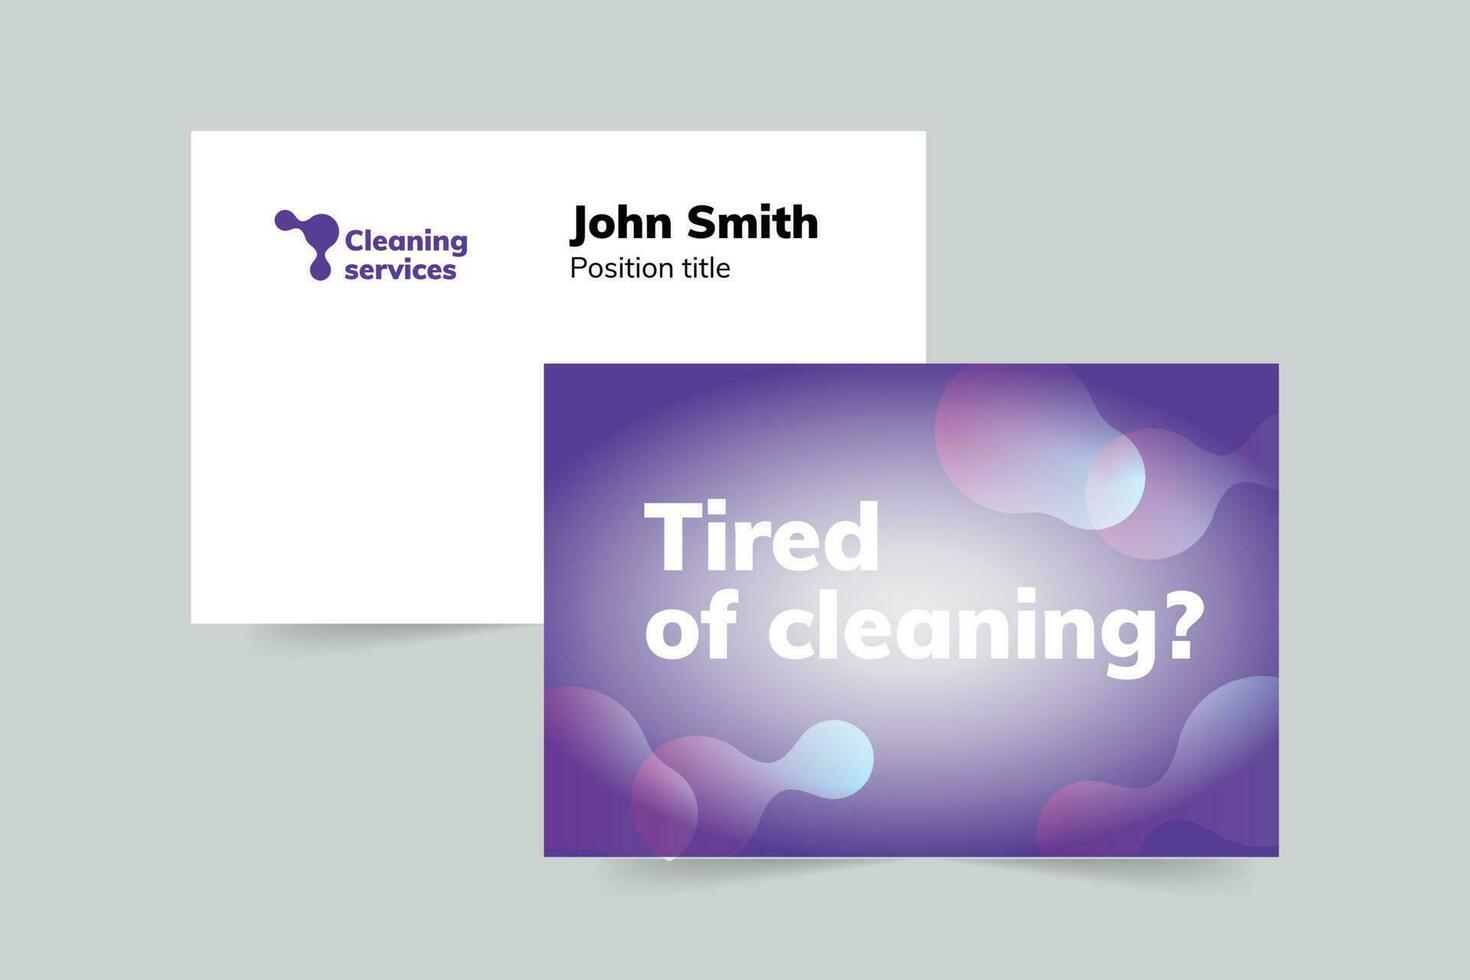 Cleaning Service business card template. A clean, modern, and high-quality design business card vector design. Editable and customize template business card